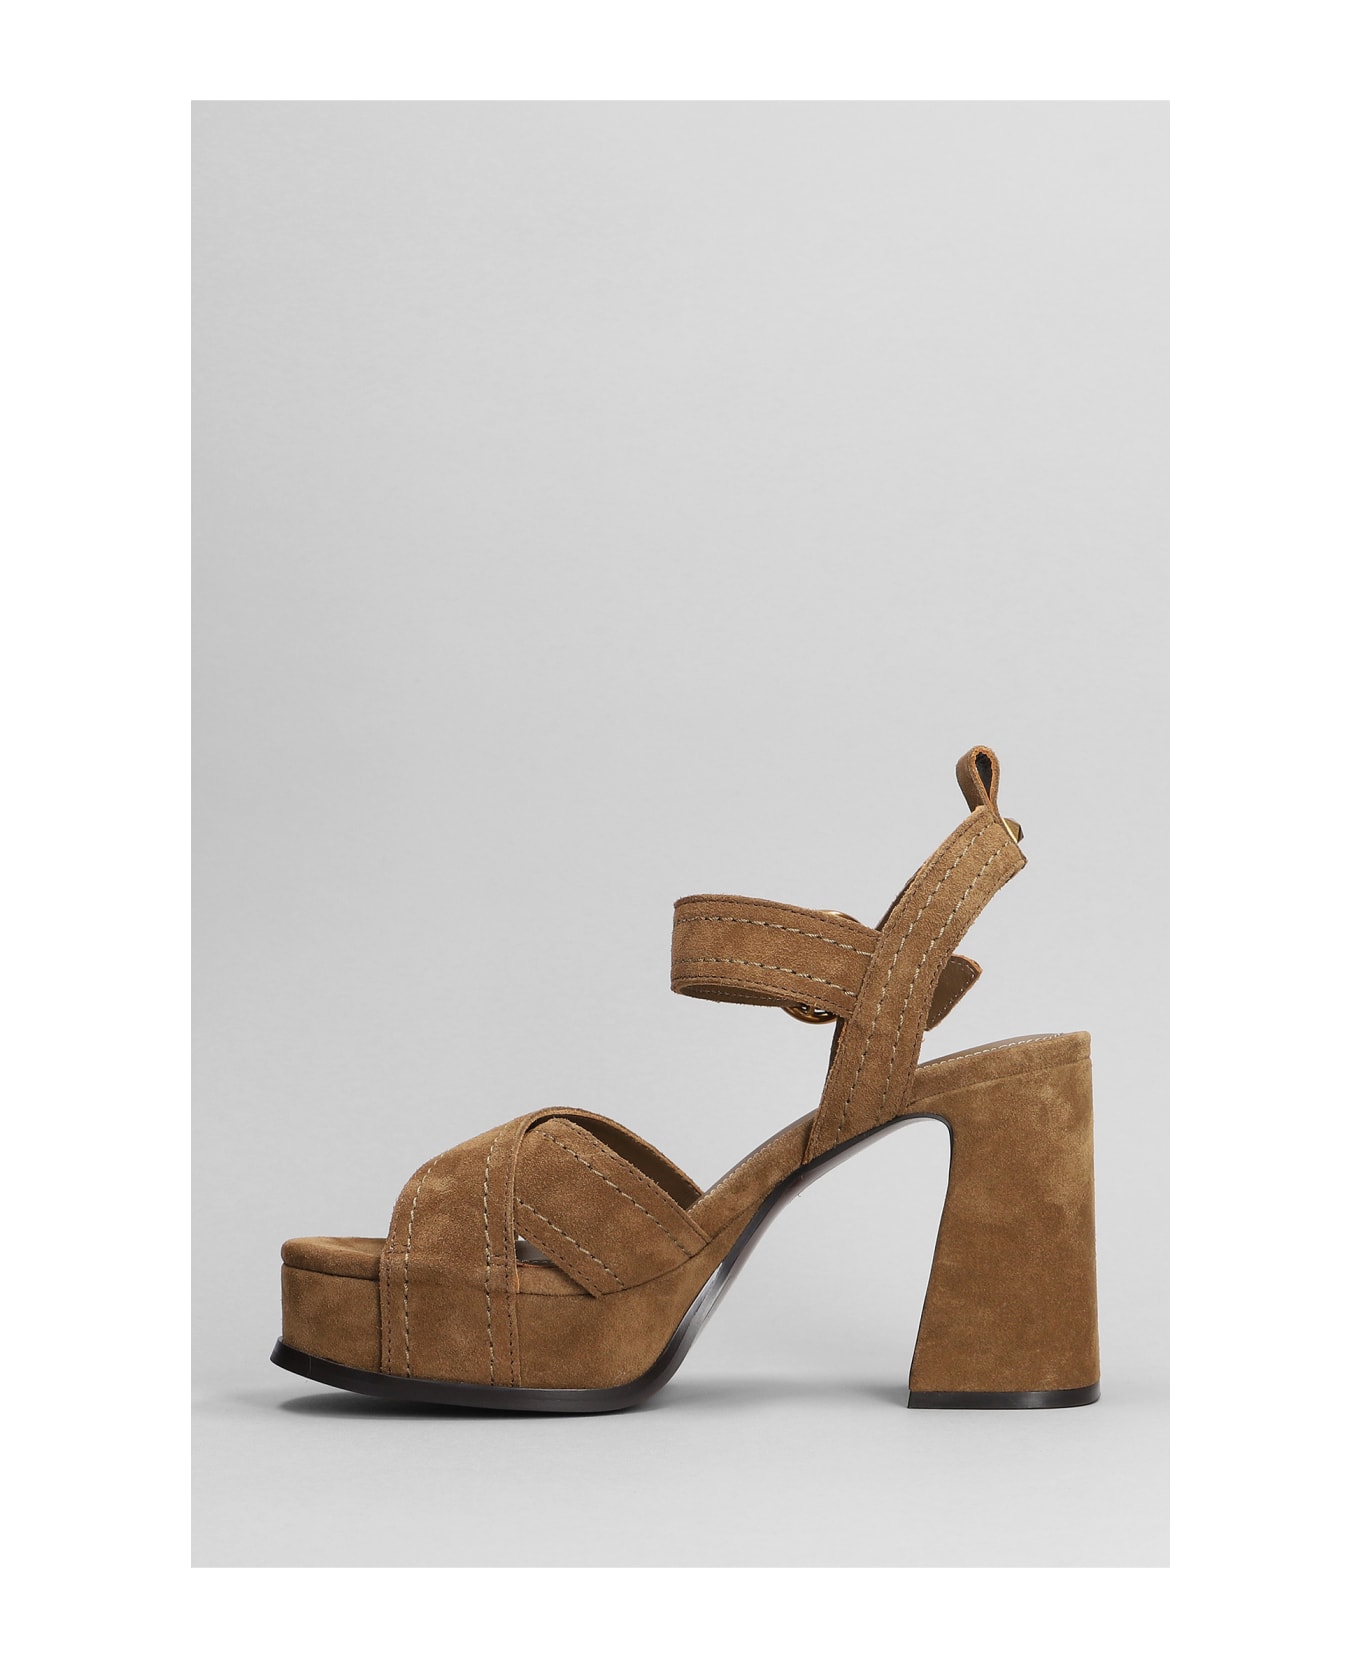 Ash Melany Sandals In Brown Suede サンダル